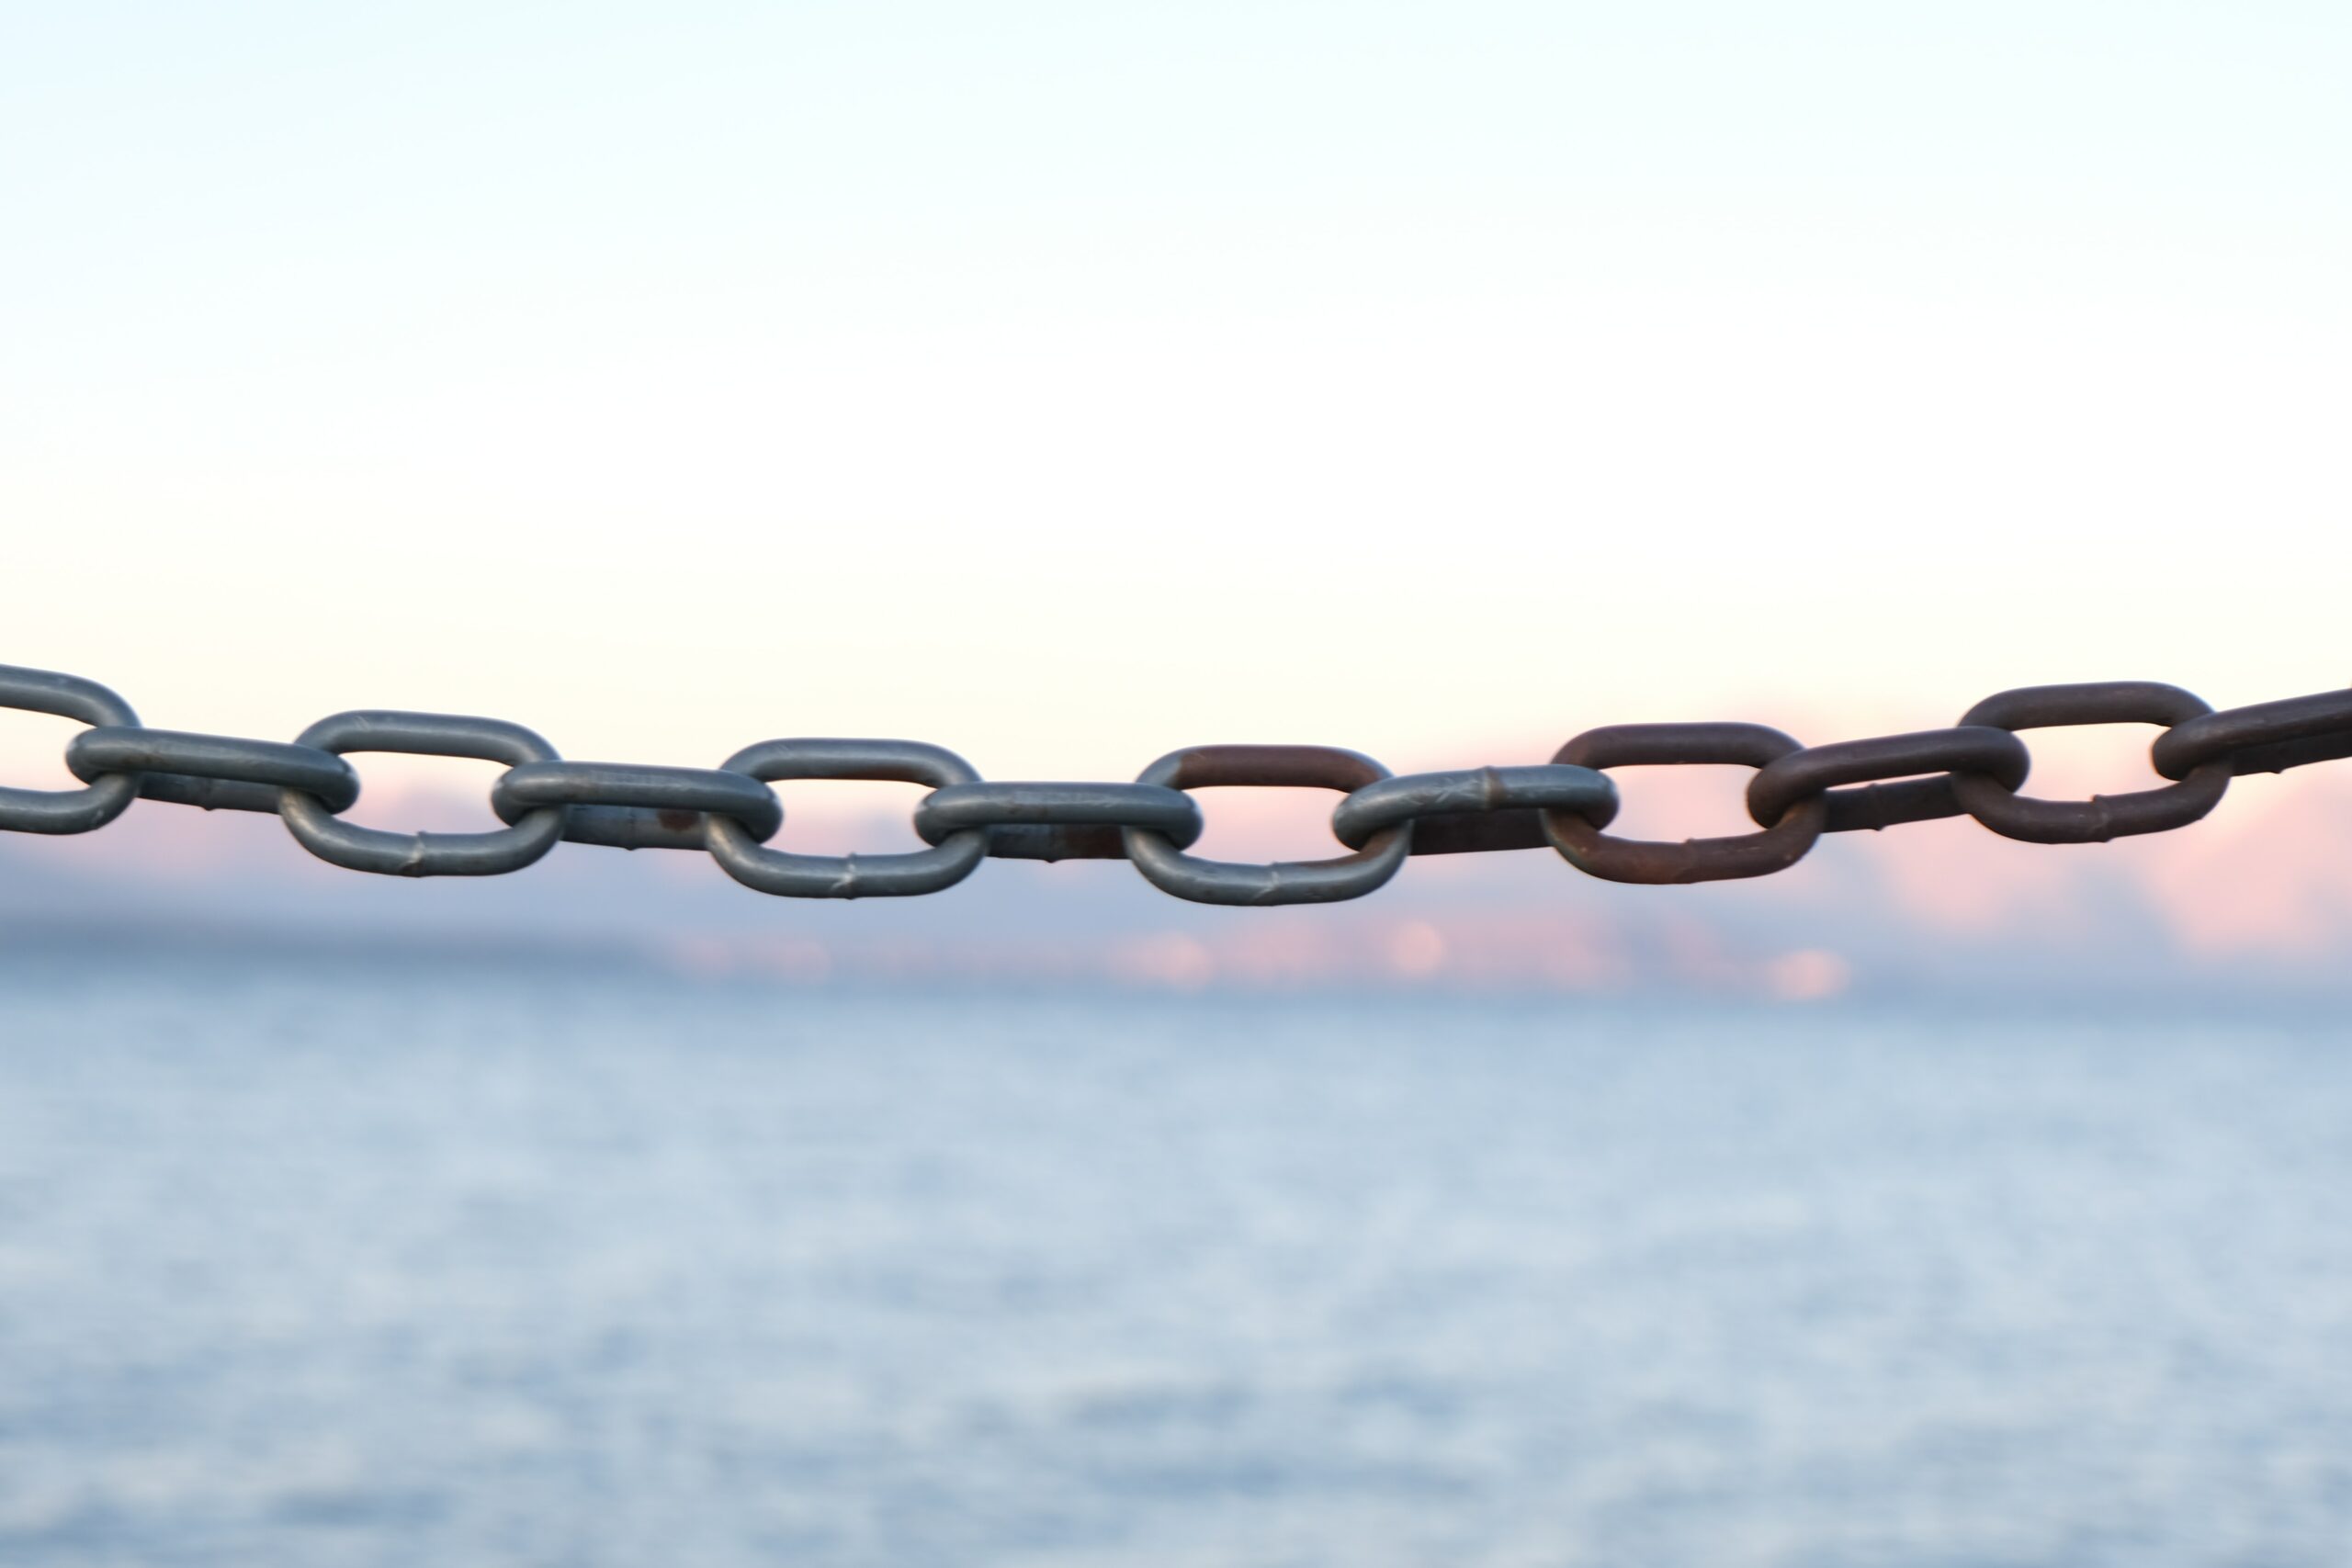 Image of a chain link in front of the sea.